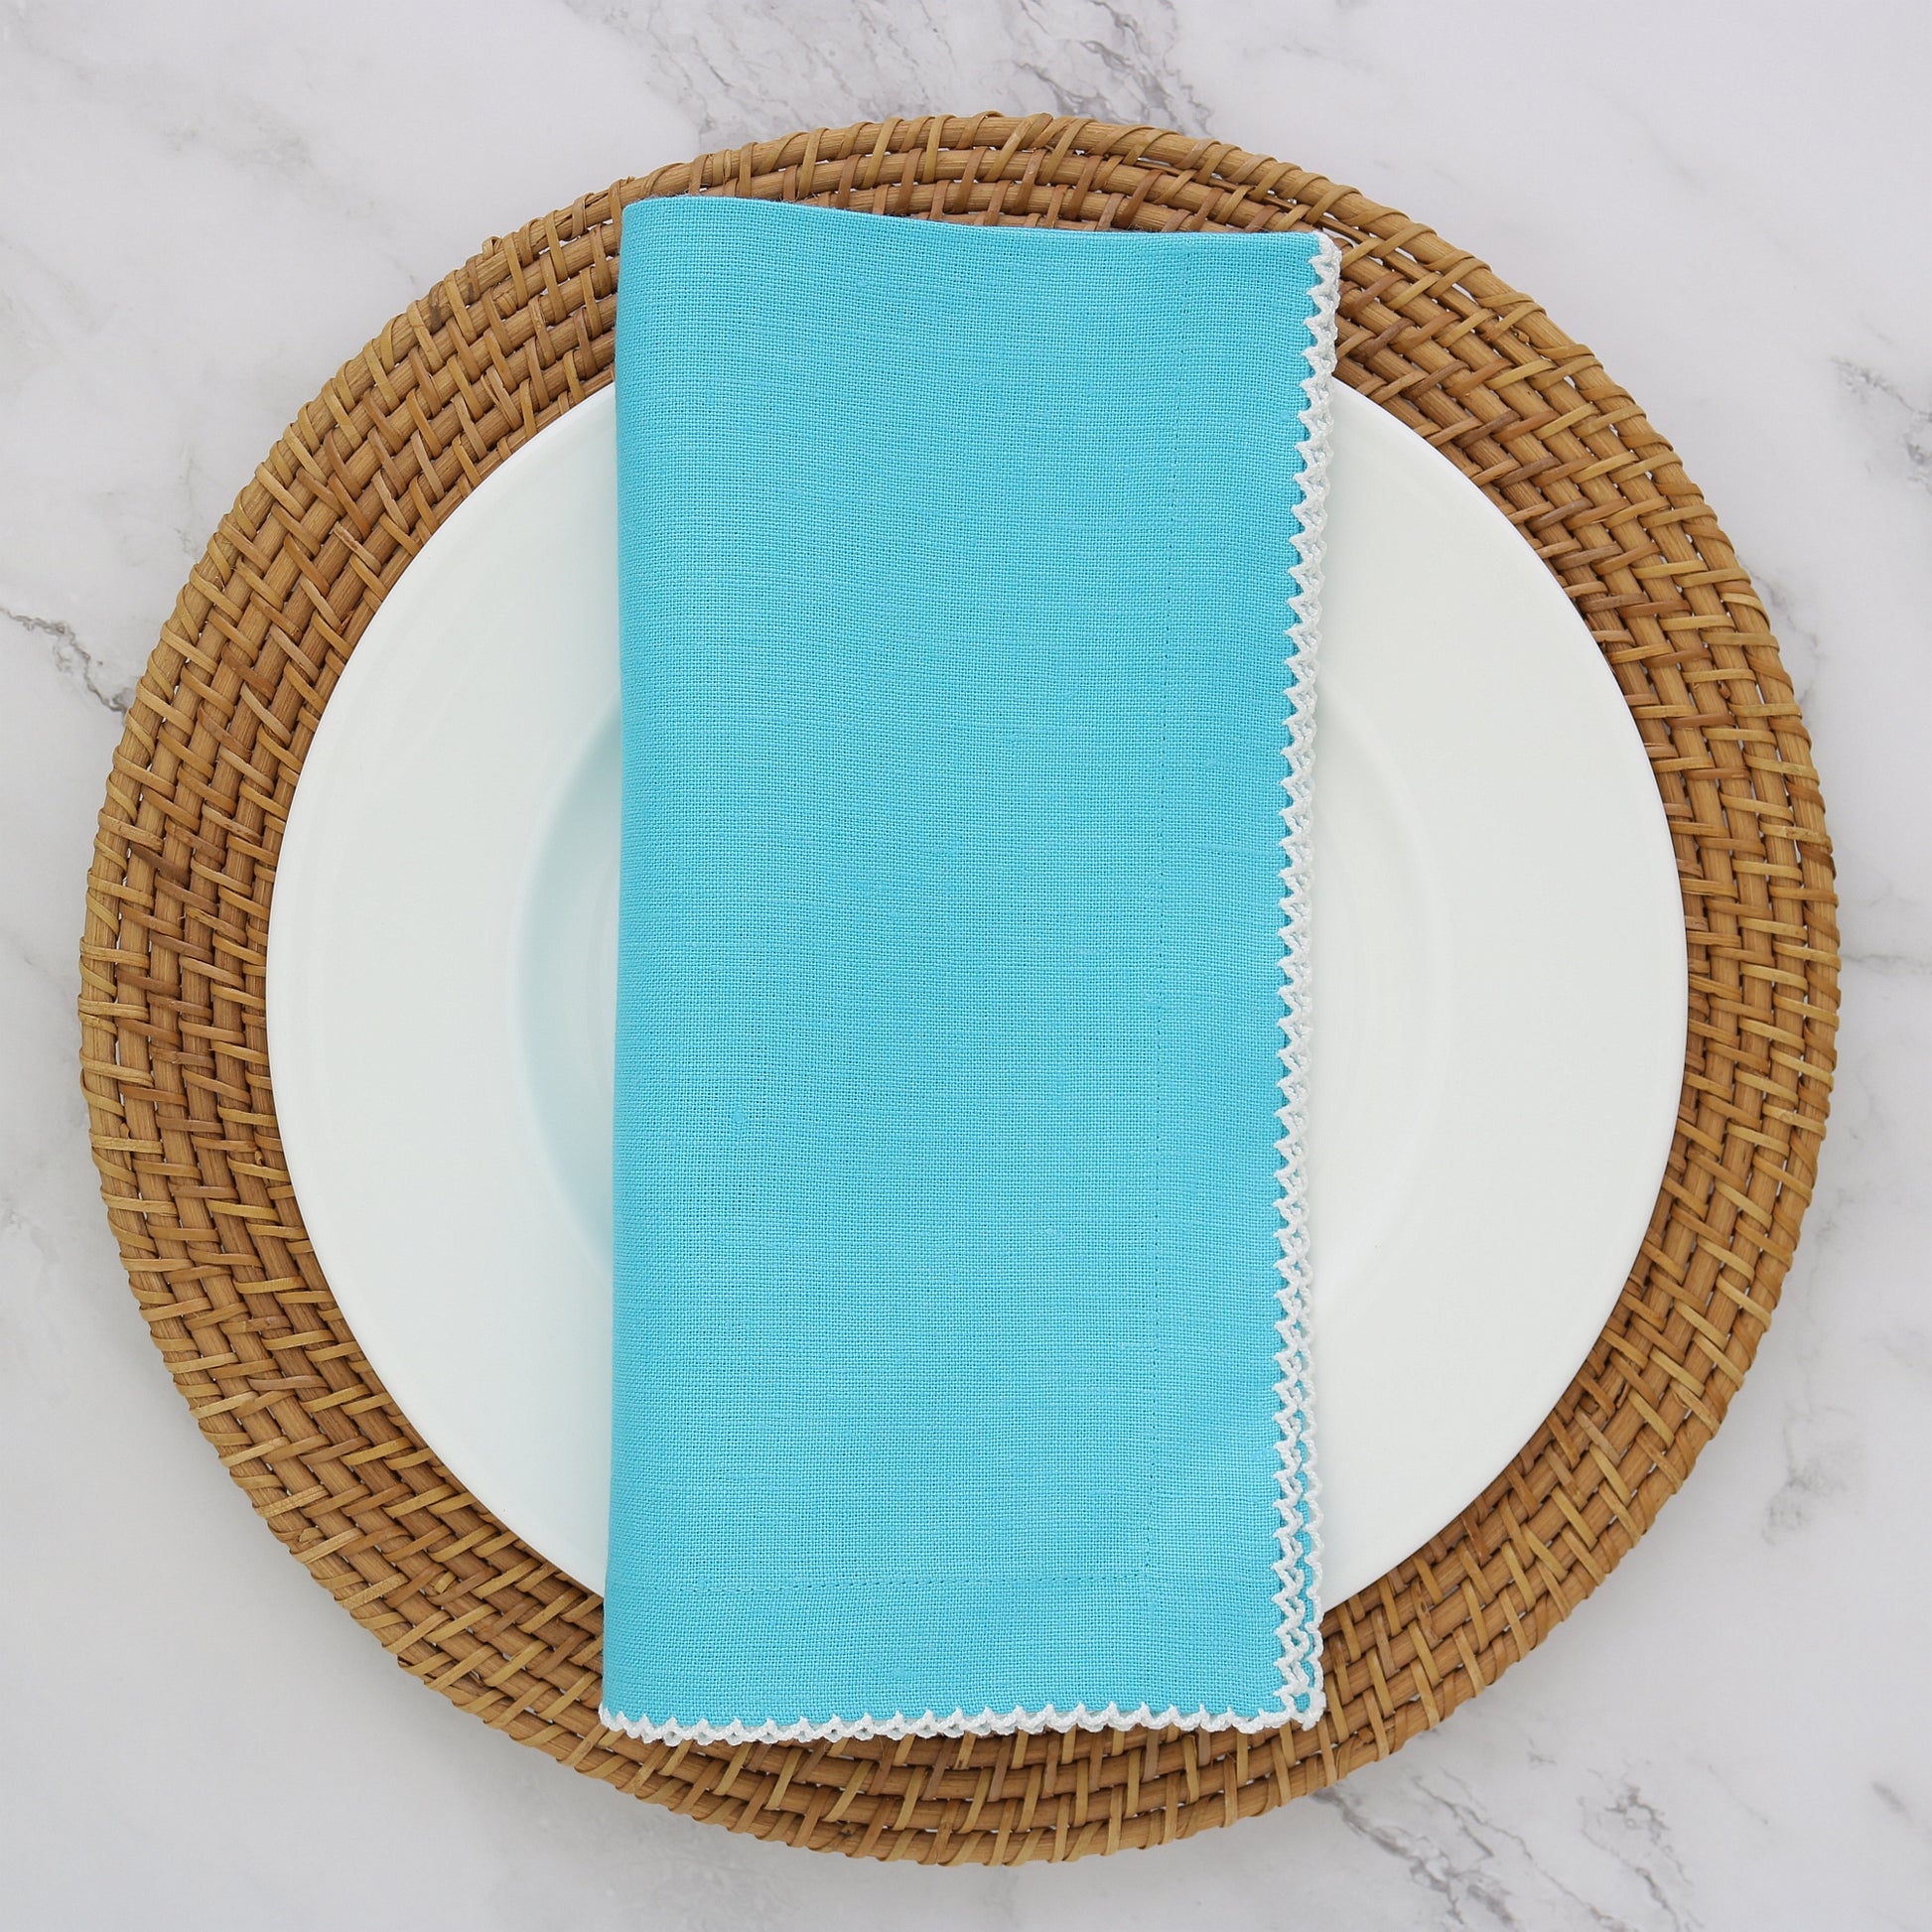 Aqua napkin with white picot trim on plate with charger